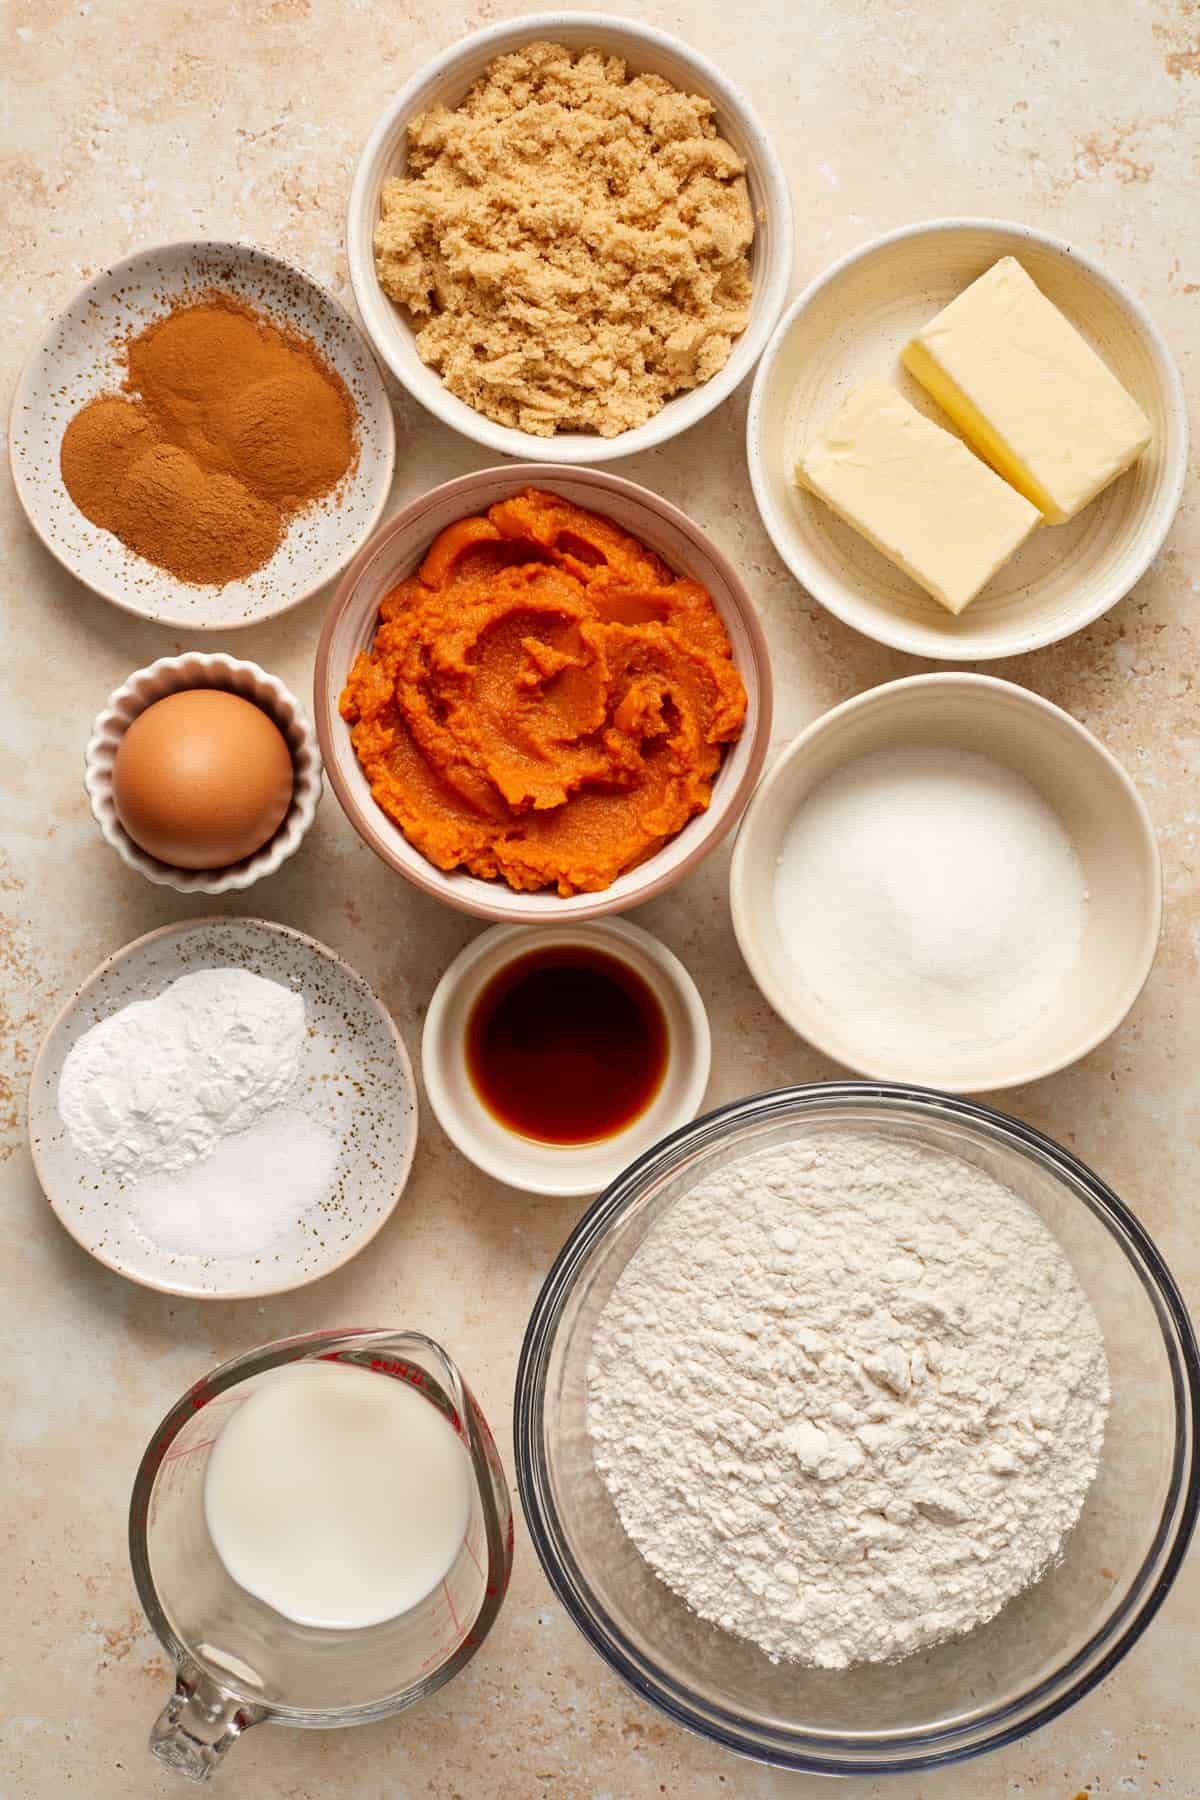 Brown sugar, flour, pumpkin, egg and other ingredients arranged on surface to make recipe.